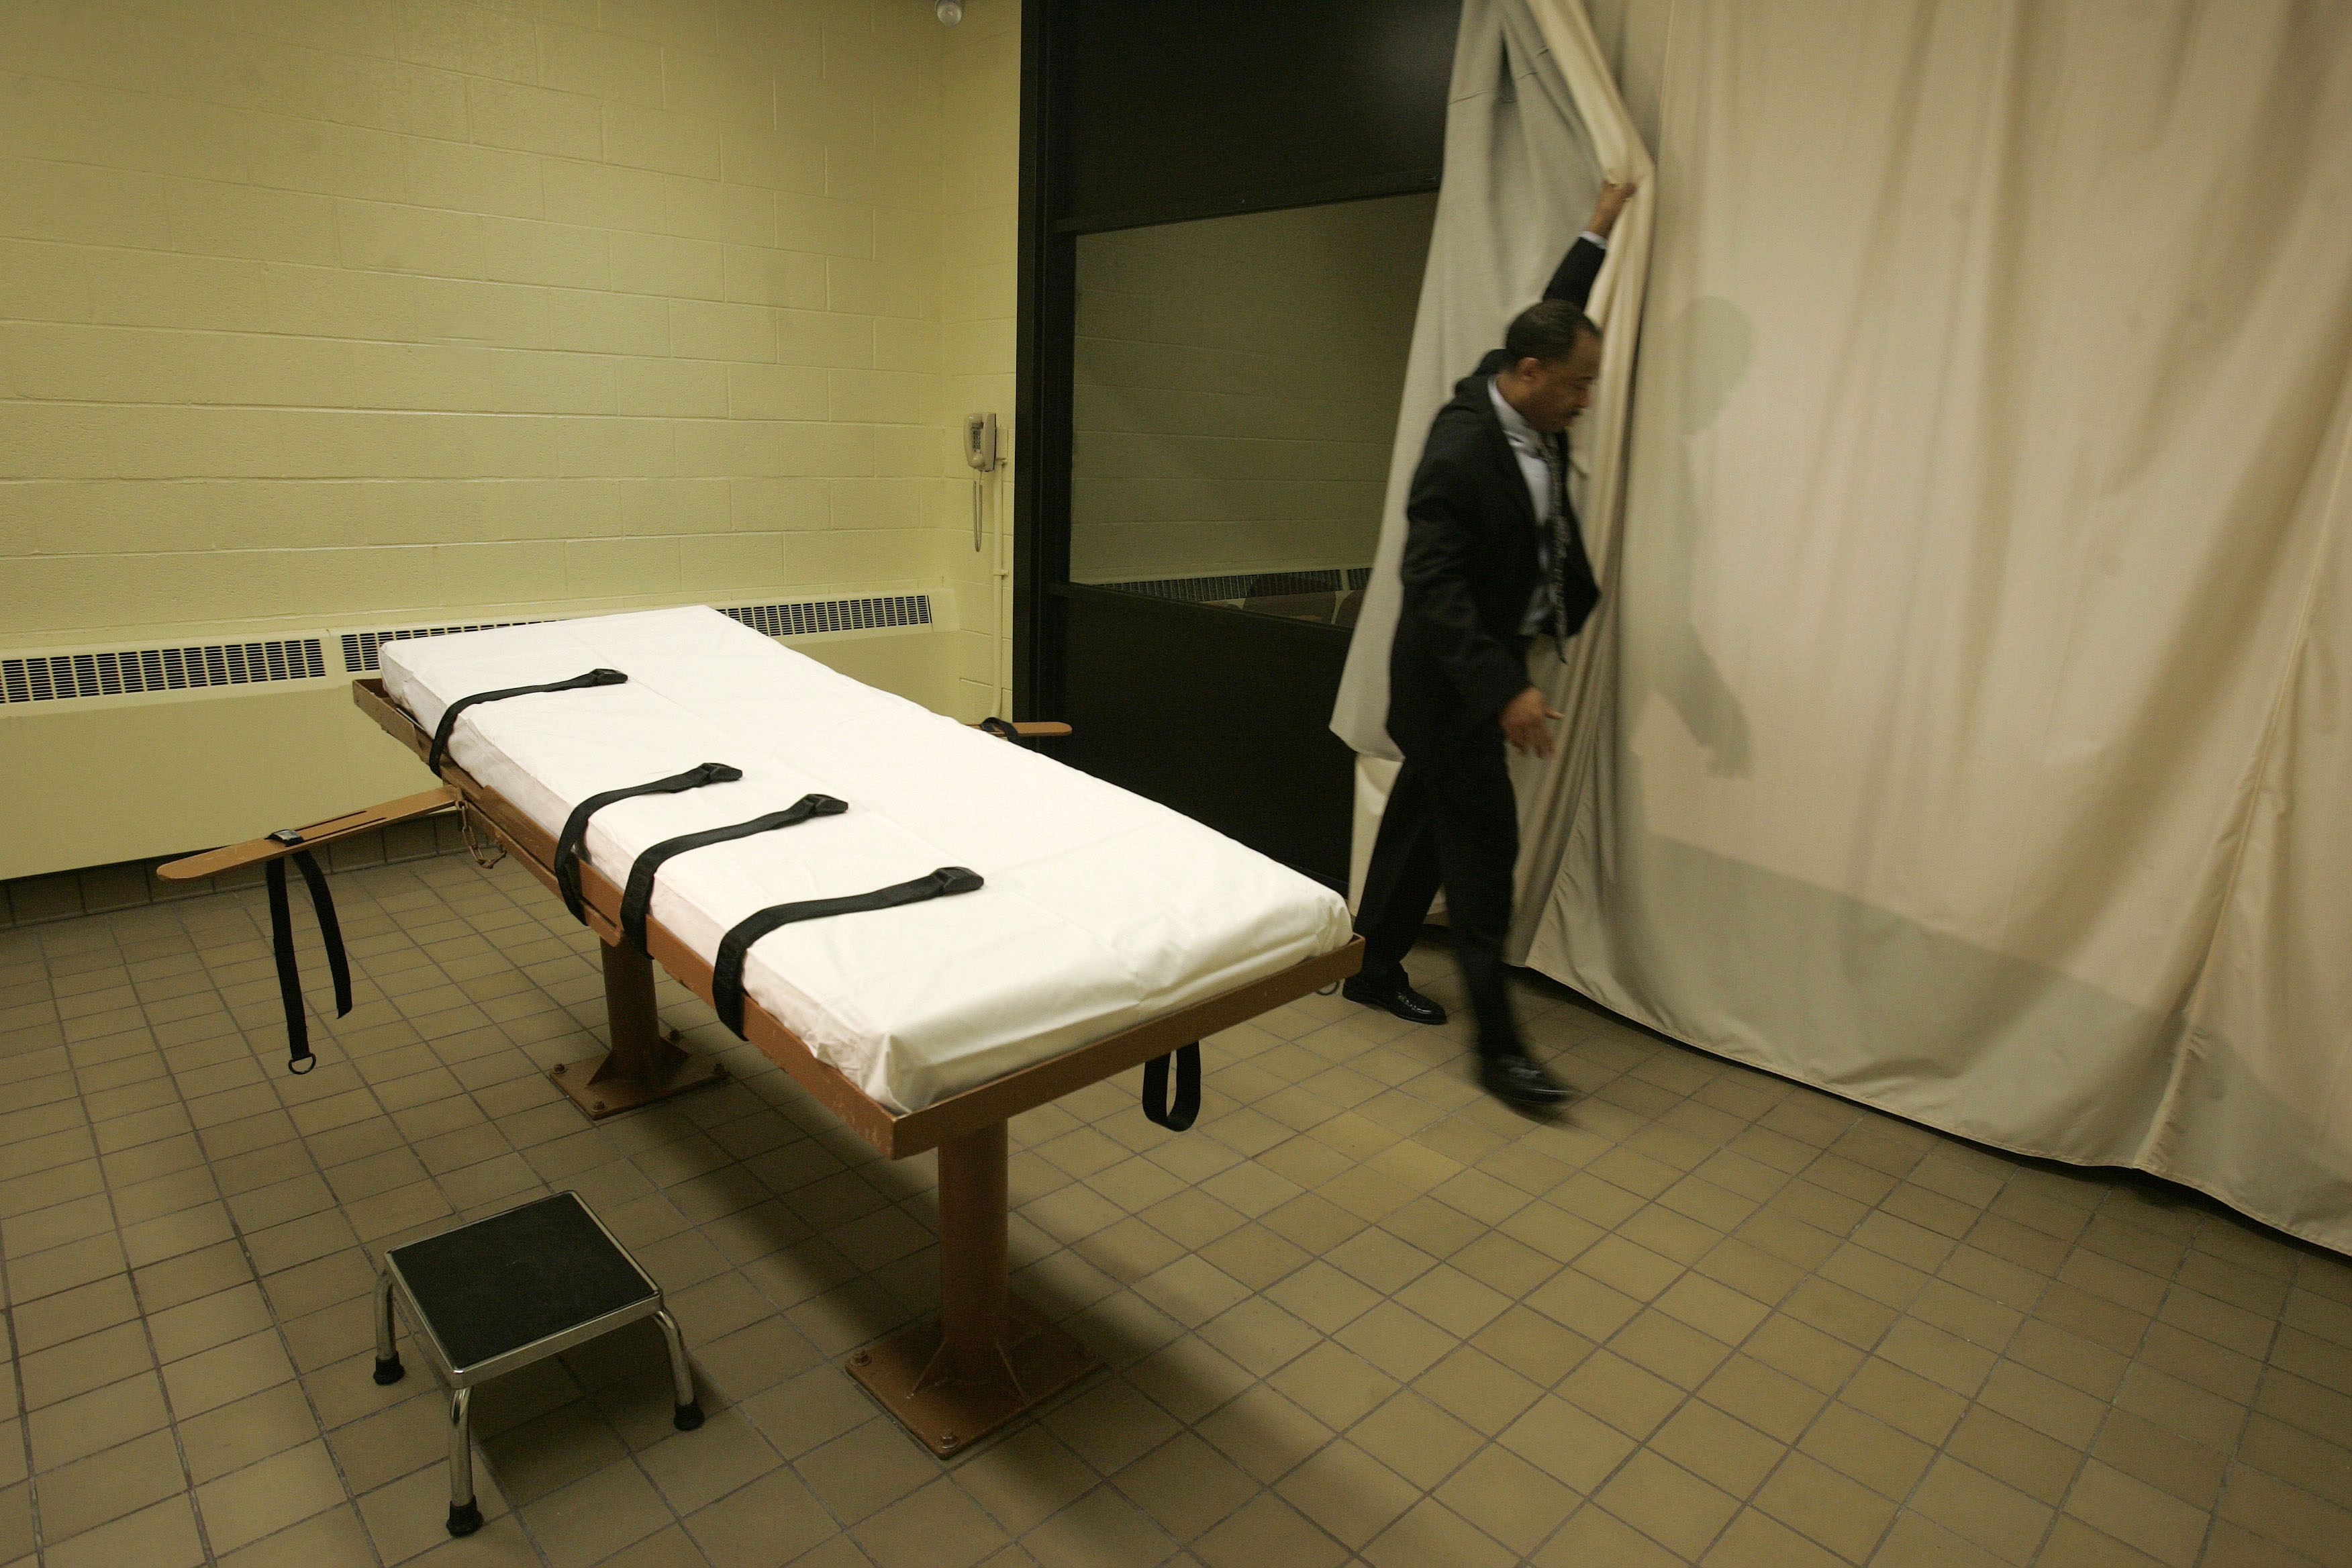 The Maker of Ohio’s Lethal Injection Drugs Wants Ohio to Stop Killing People With Them